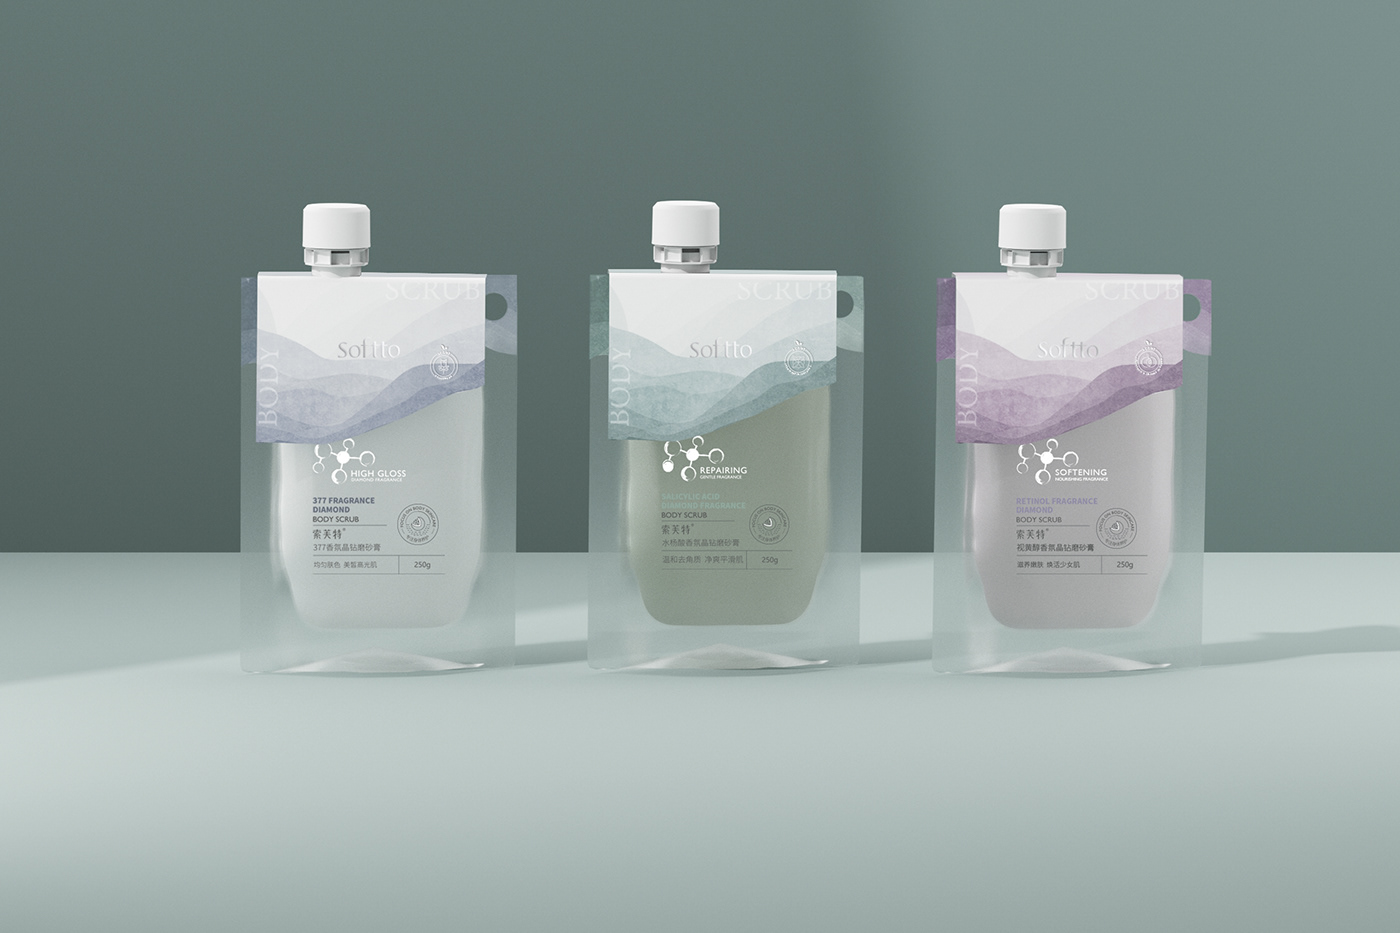 Body care packaging design